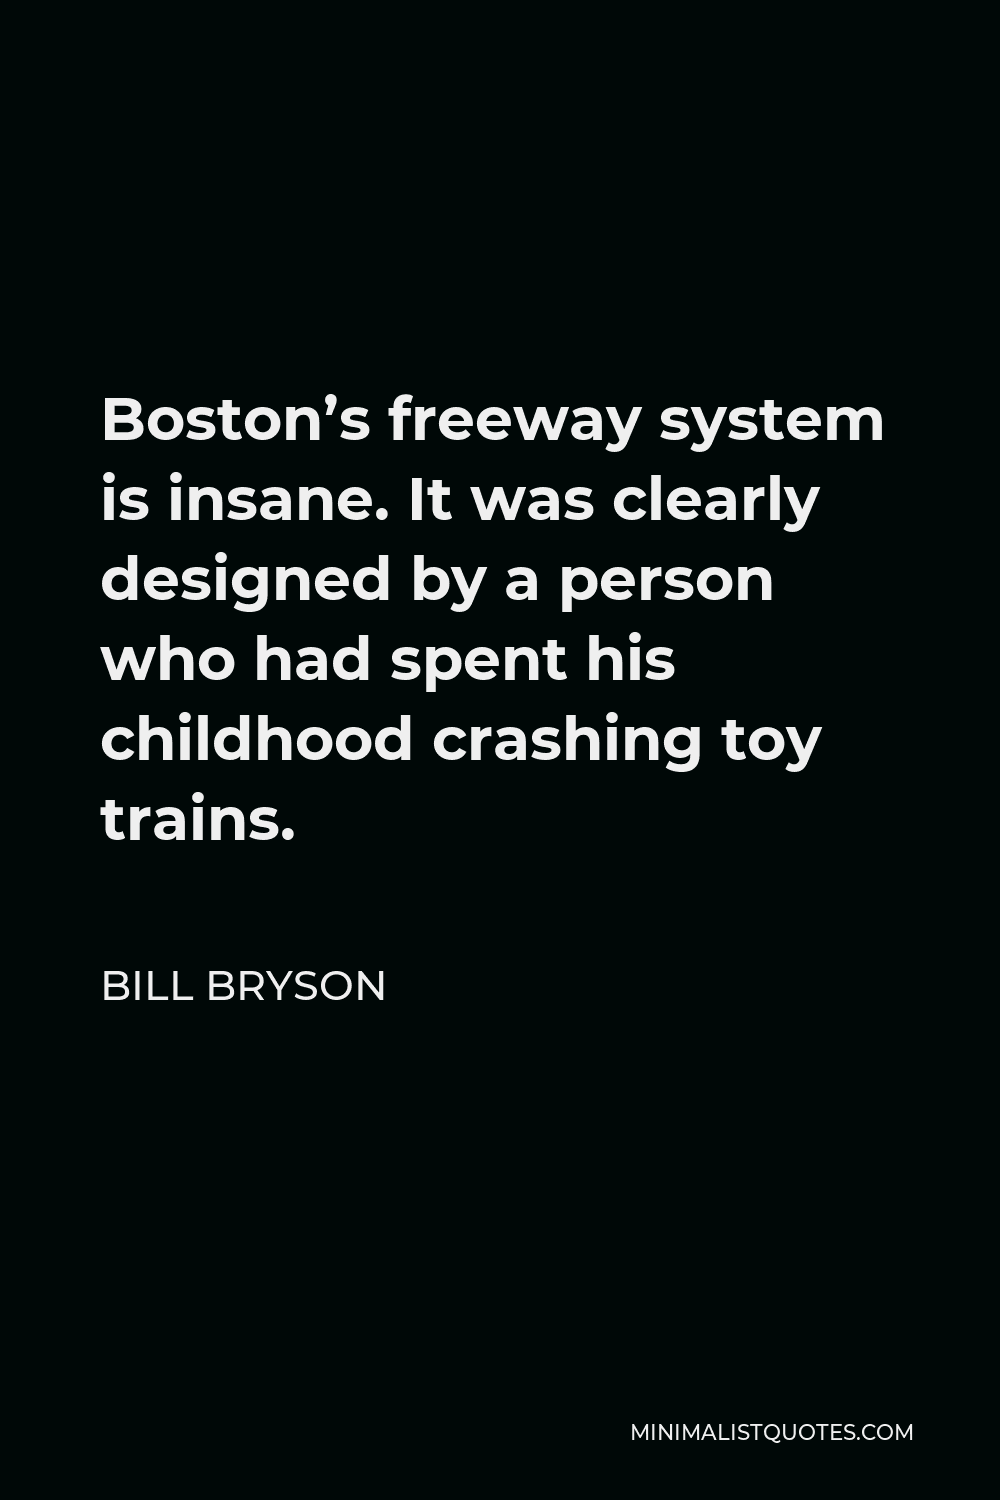 Bill Bryson Quote - Boston’s freeway system is insane. It was clearly designed by a person who had spent his childhood crashing toy trains.